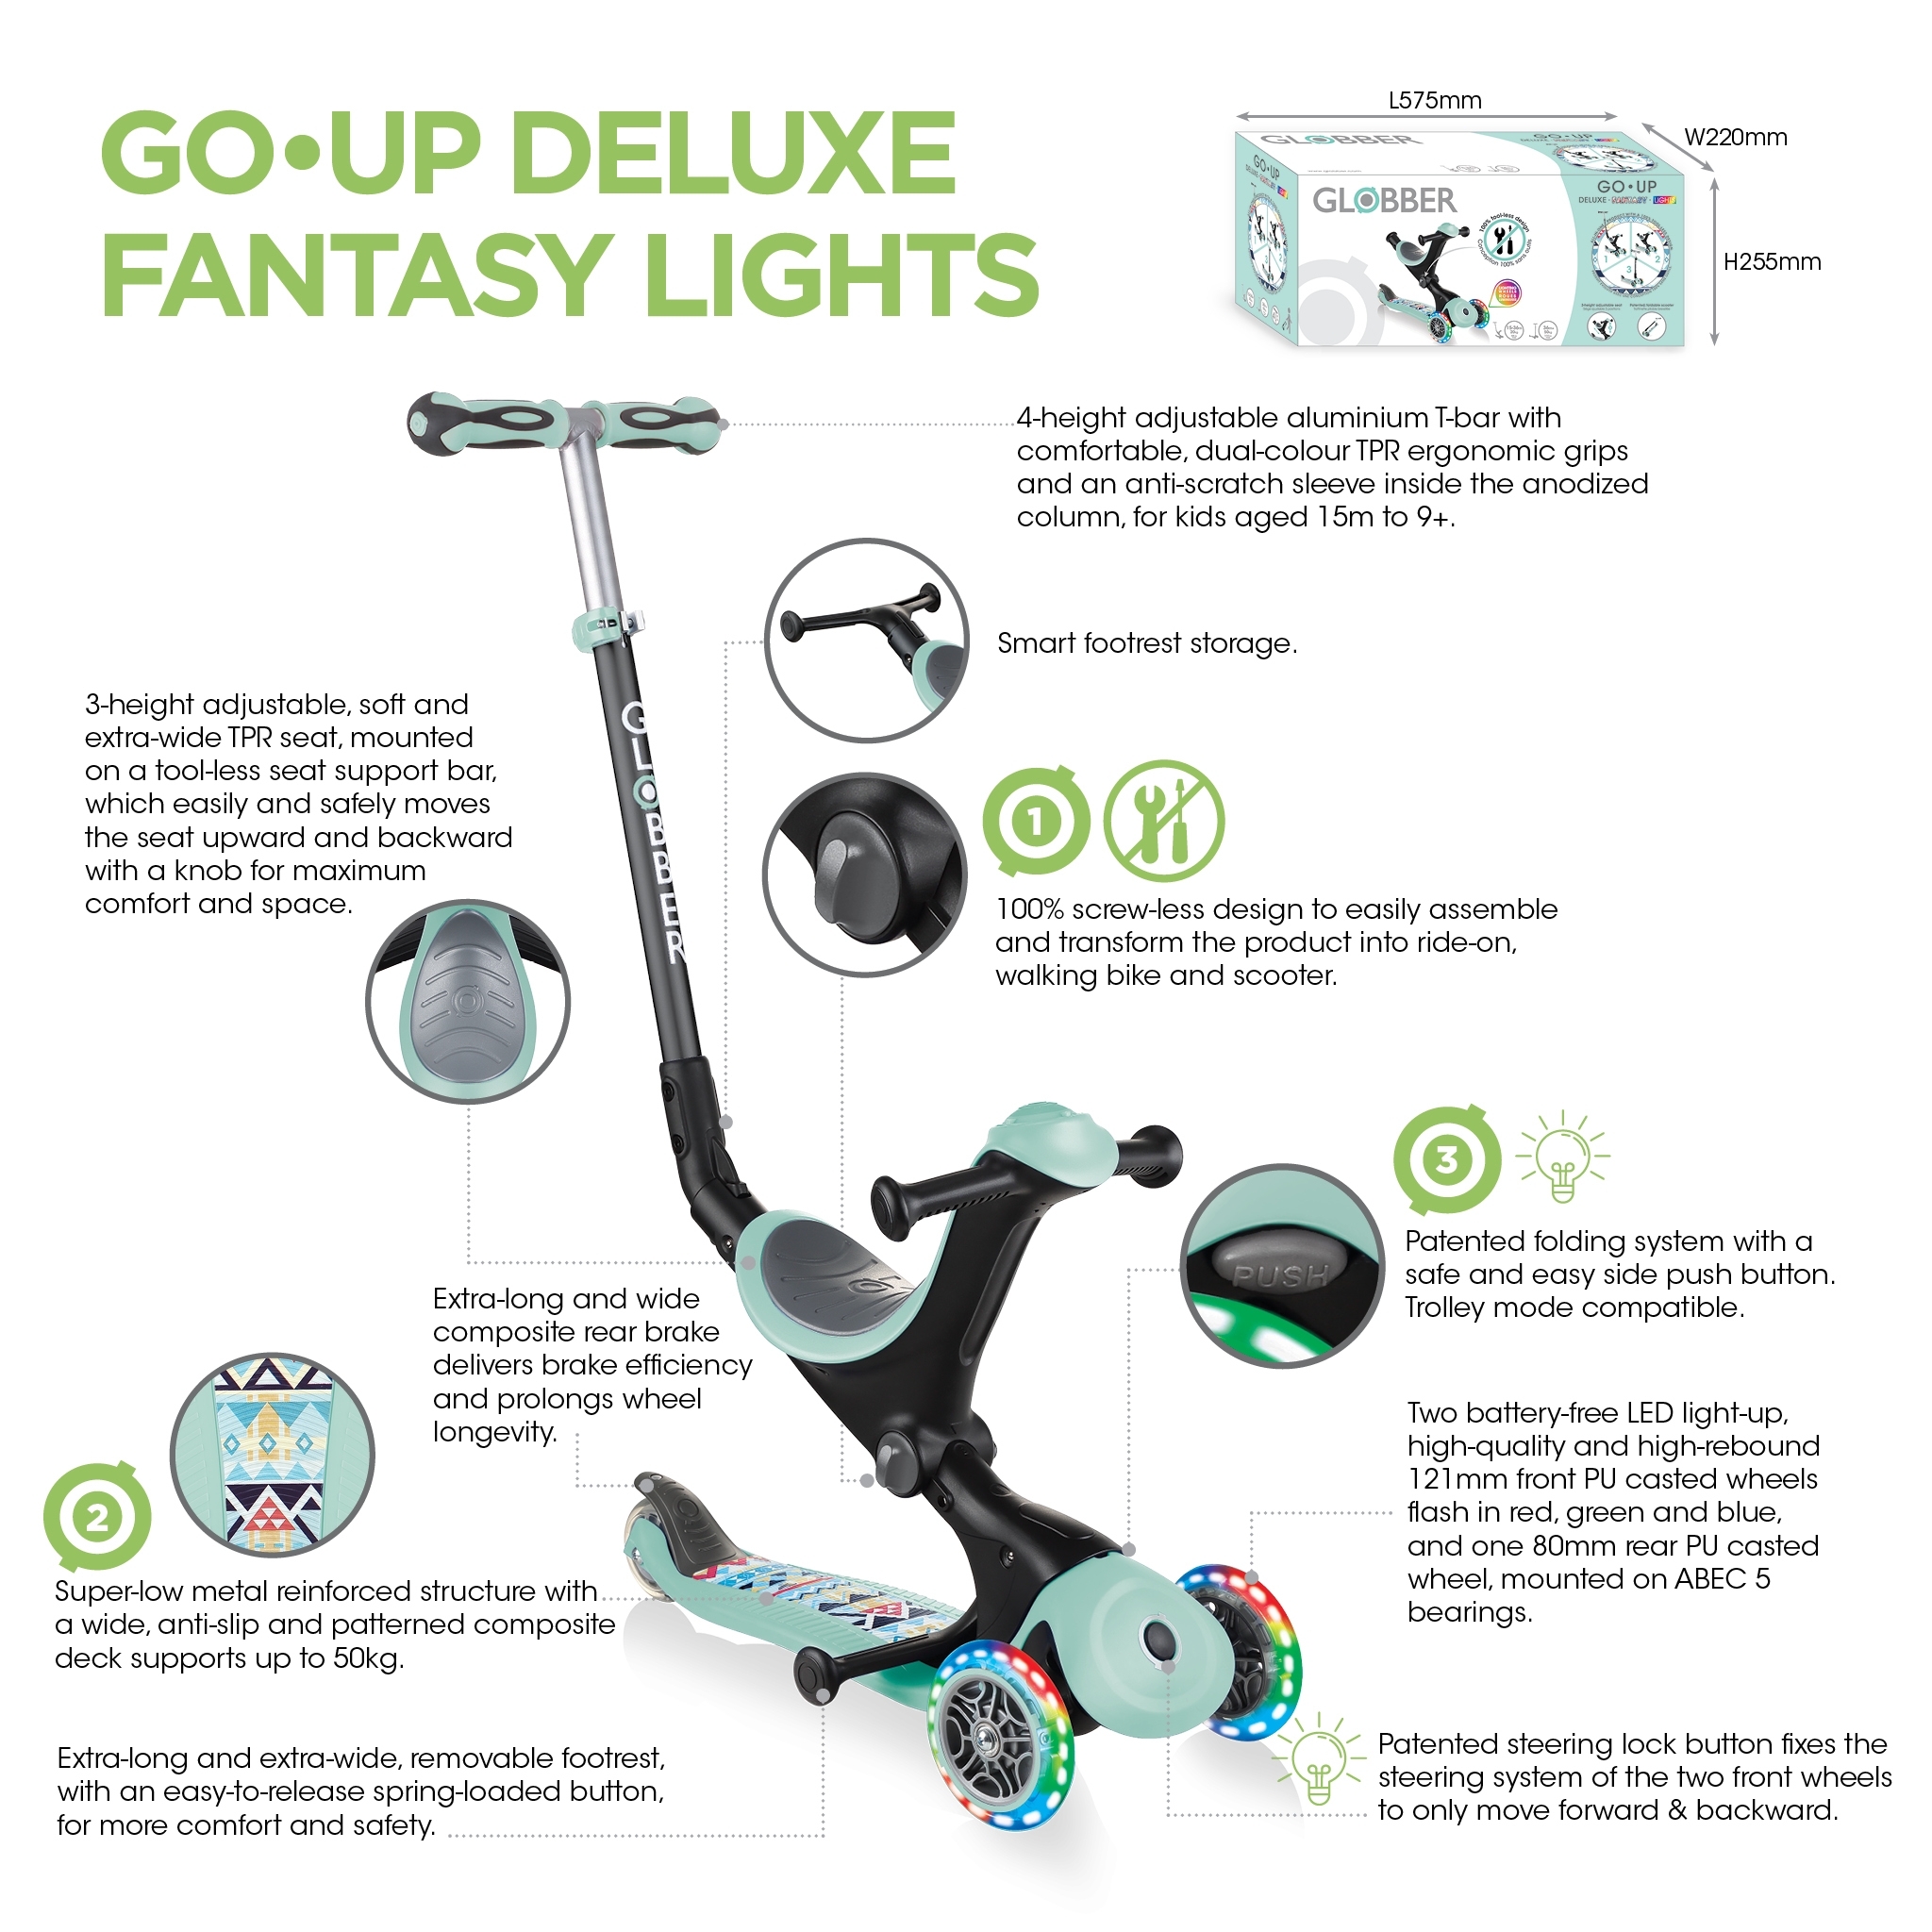 Scooter-with-seat-for-toddlers-Globber-GO-UP-DELUXE-FANTASY-LIGHTS 1